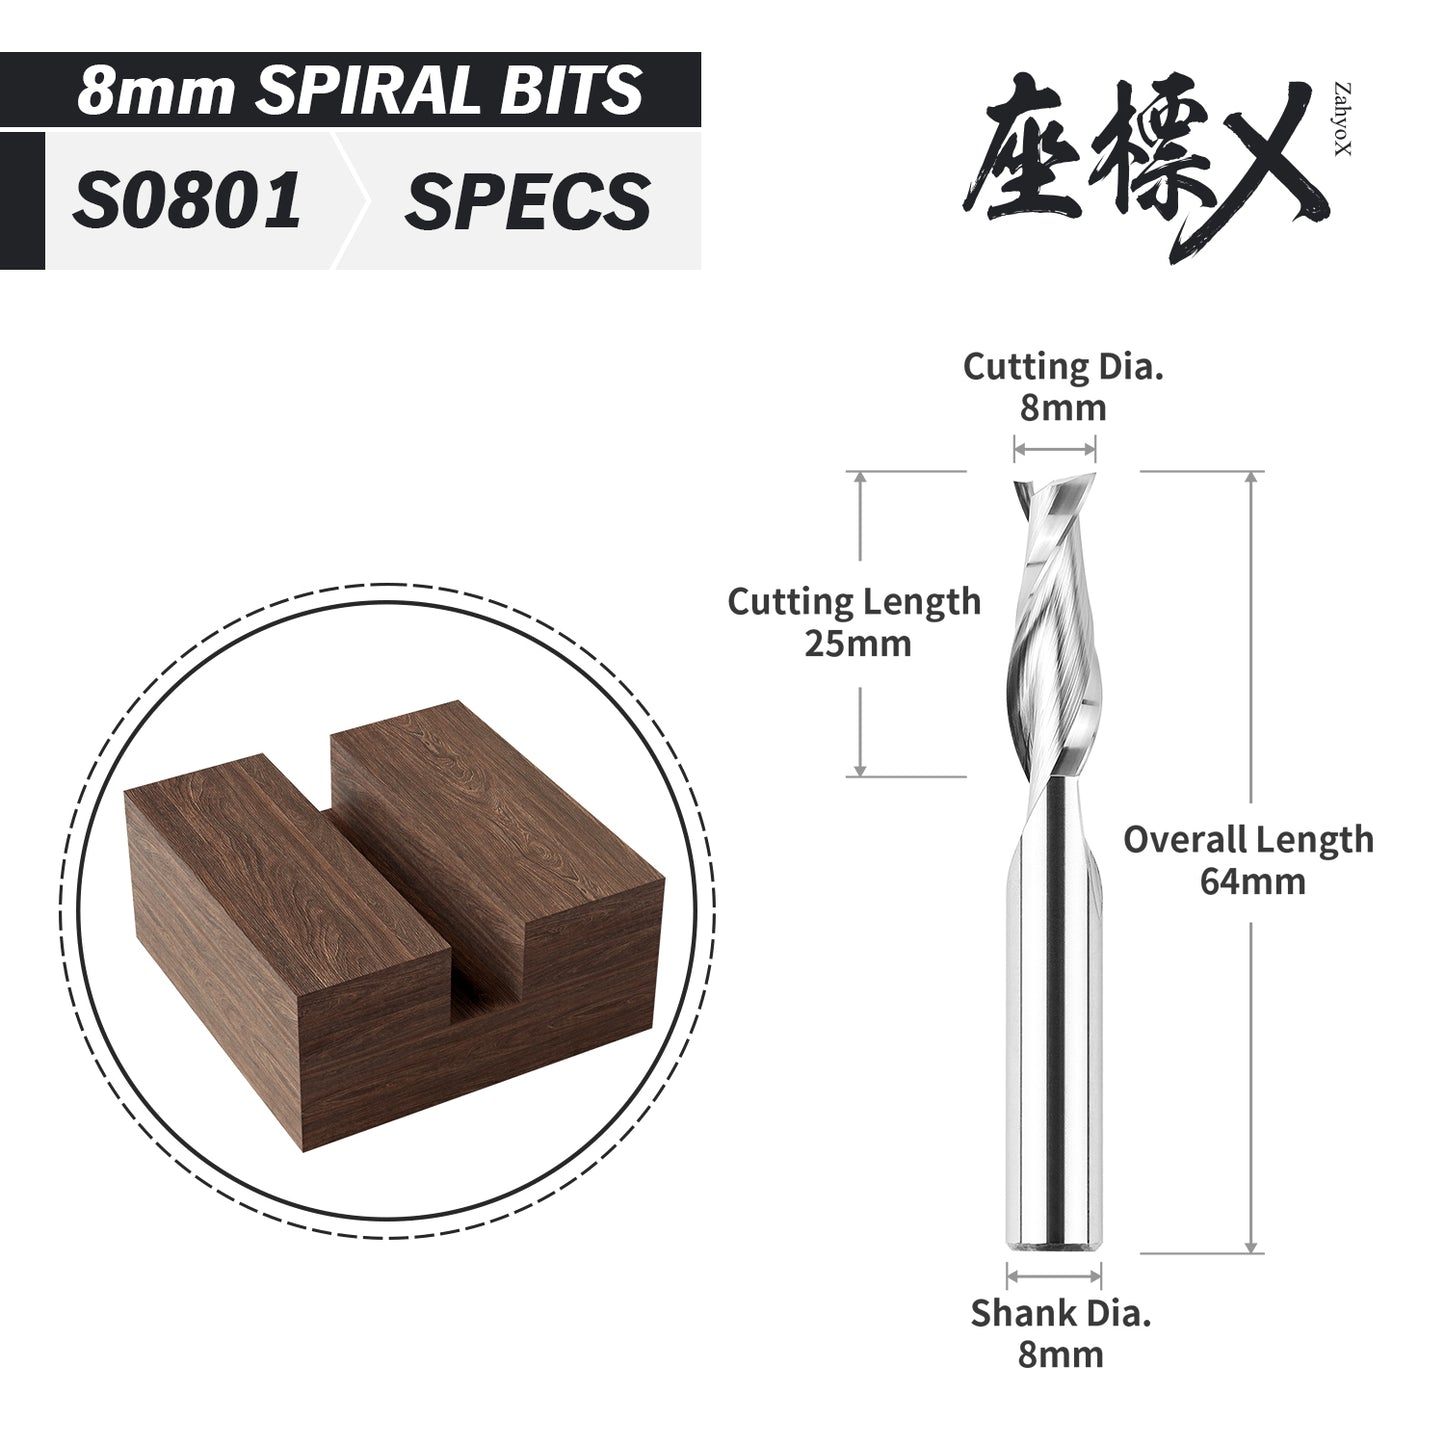 S0801 Solid Carbide Metric Upcut Spiral Router Bit - 2 Flutes - 8mm SD - 8mm CD - 25mm CL - 64mm OL